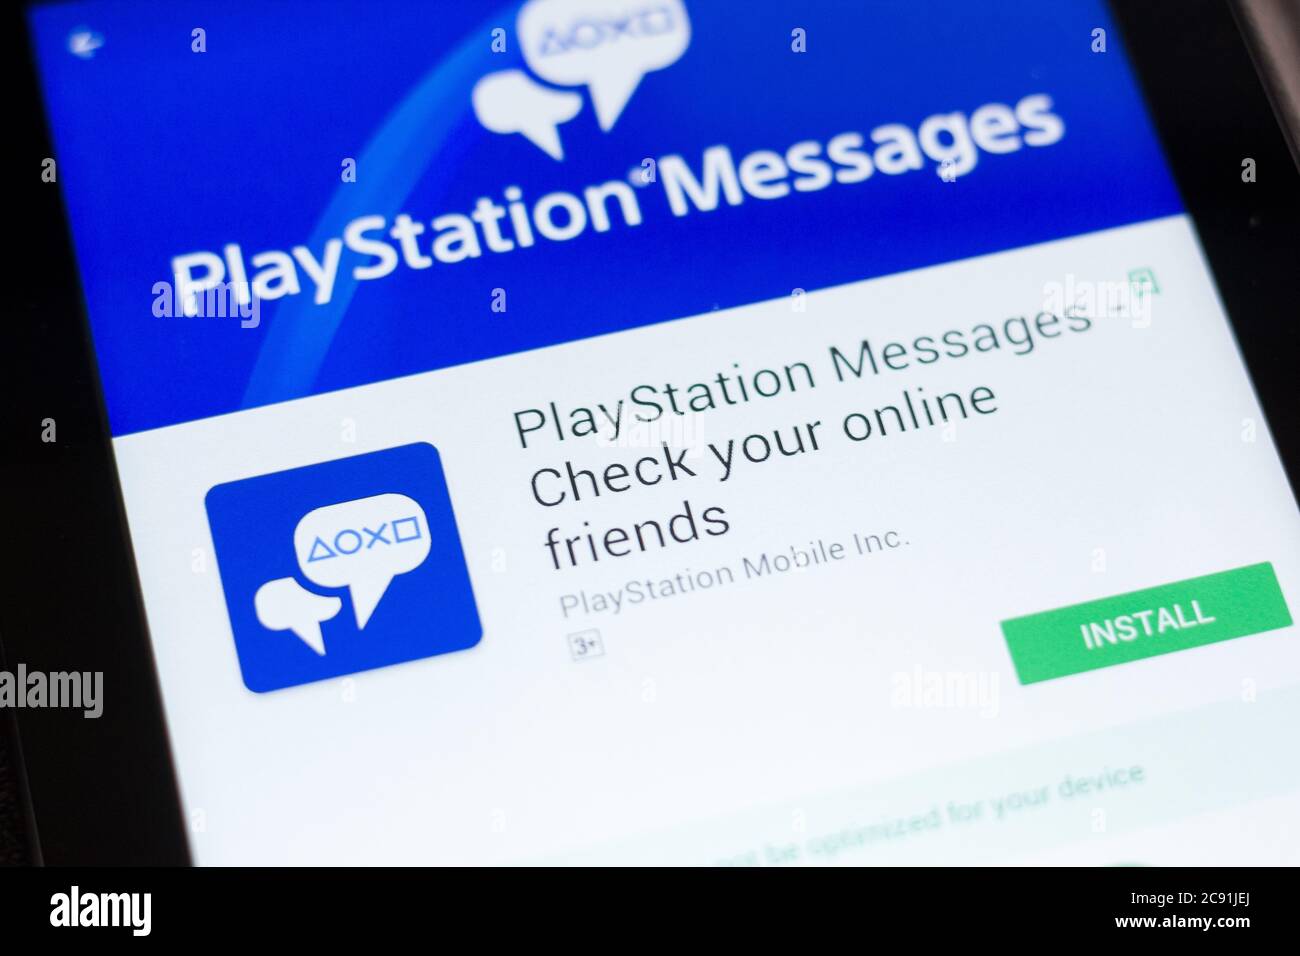 Playstation Messages High Resolution Stock Photography and Images - Alamy